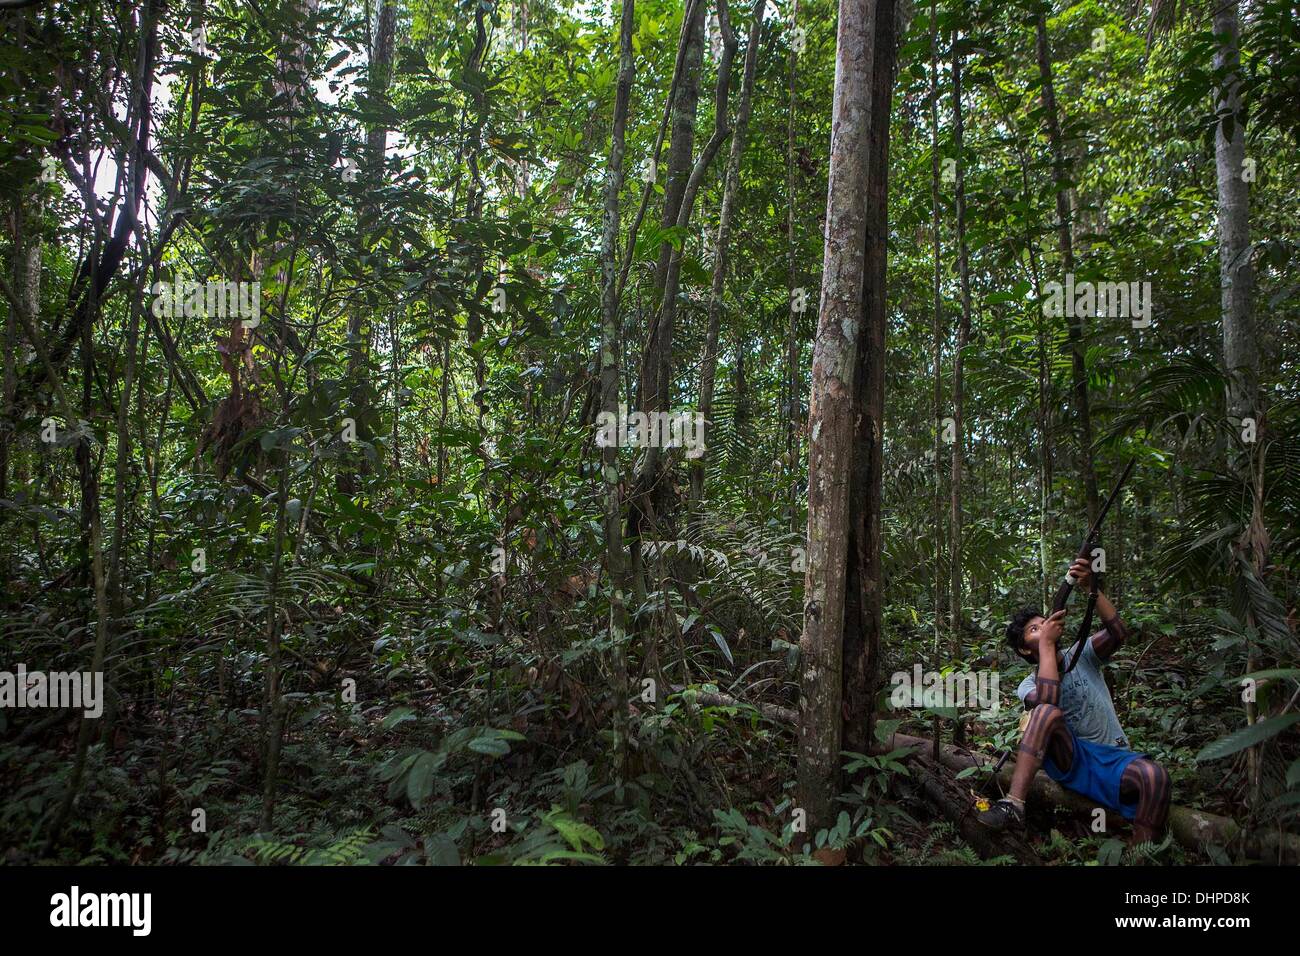 April 27, 2013 - Poti-Kro, Para, Brazil - A young man sights down the barrel of his shotgun while hunting in the jungle. Hunting trips are quiet affairs with many stops to listen for game. Experienced hunters can recognize and mimic many animal sounds. The indigenous Xikrin people live on the Bacaja, a tributary of the Xingu River, where construction of the Belo Monte Dam is reaching peak construction. Some scientists warn that the water level of the Bacaja will decrease precipitously due to the dam. (Credit Image: © Taylor Weidman/ZUMA Wire/ZUMAPRESS.com) Stock Photo